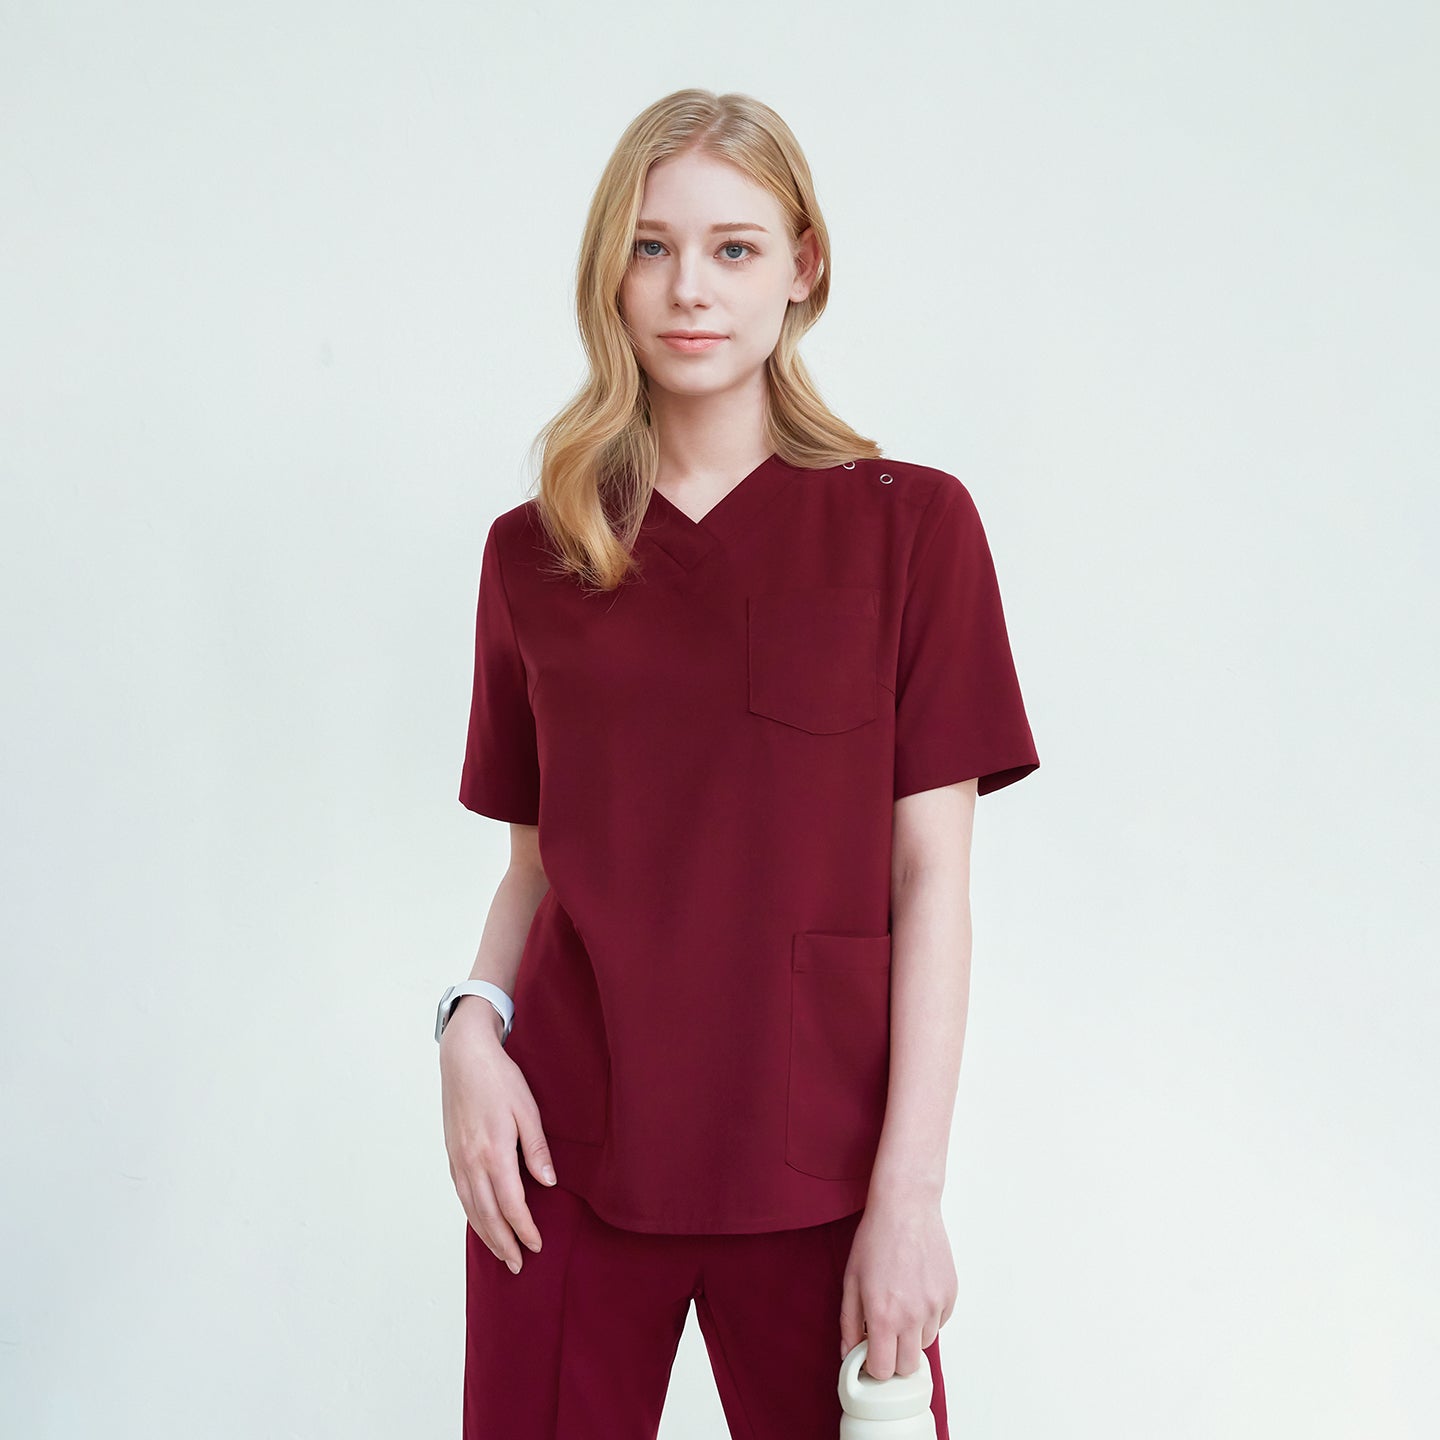 A woman wearing a scrub top with a V-neck and three buttons on the shoulder, paired with matching pants, standing against a plain background,Burgundy